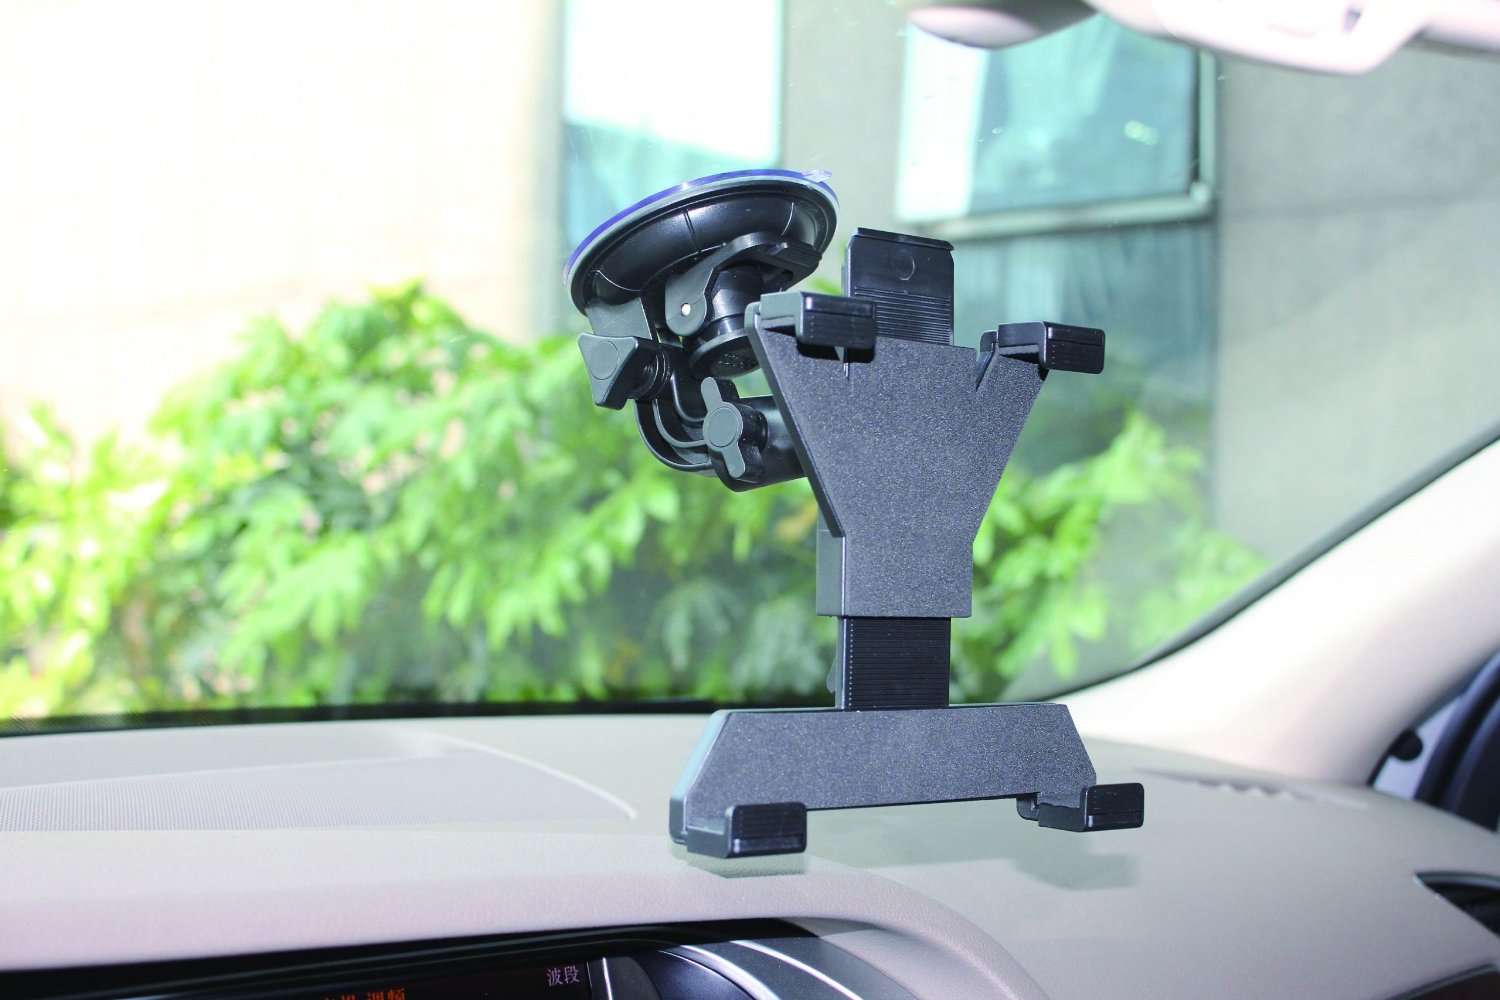 IBRA Windscreen In Car Suction Mount Holder with FULL 360 Degrees Rotation For Apple ipad 1/Ipad 2/ and iPad 3/4,Samsung Galaxy Tab 7.0 8.0 10.1 3 / Kindle Fire HDX 7 8.9 / Google Nexus 7 FHD 7 and many other models